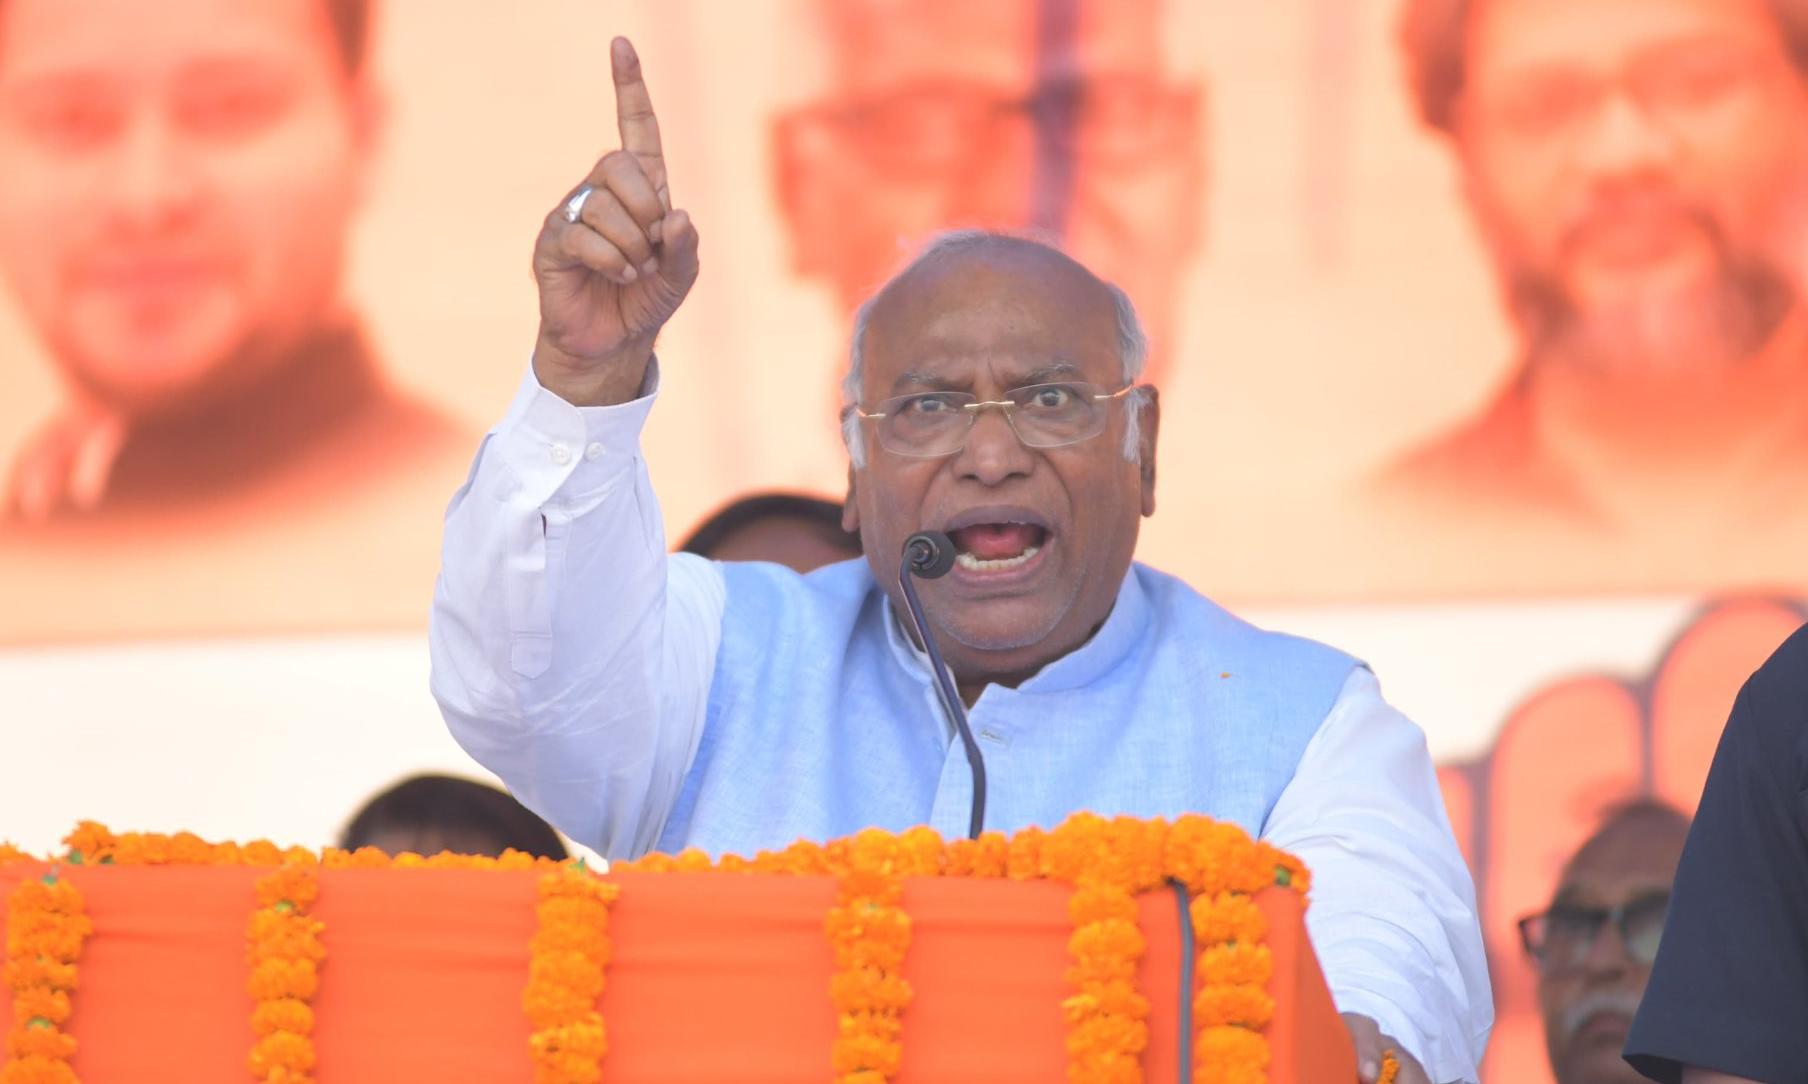 Seek votes on basis of governance, not through hate speech: Kharge in letter to Modi